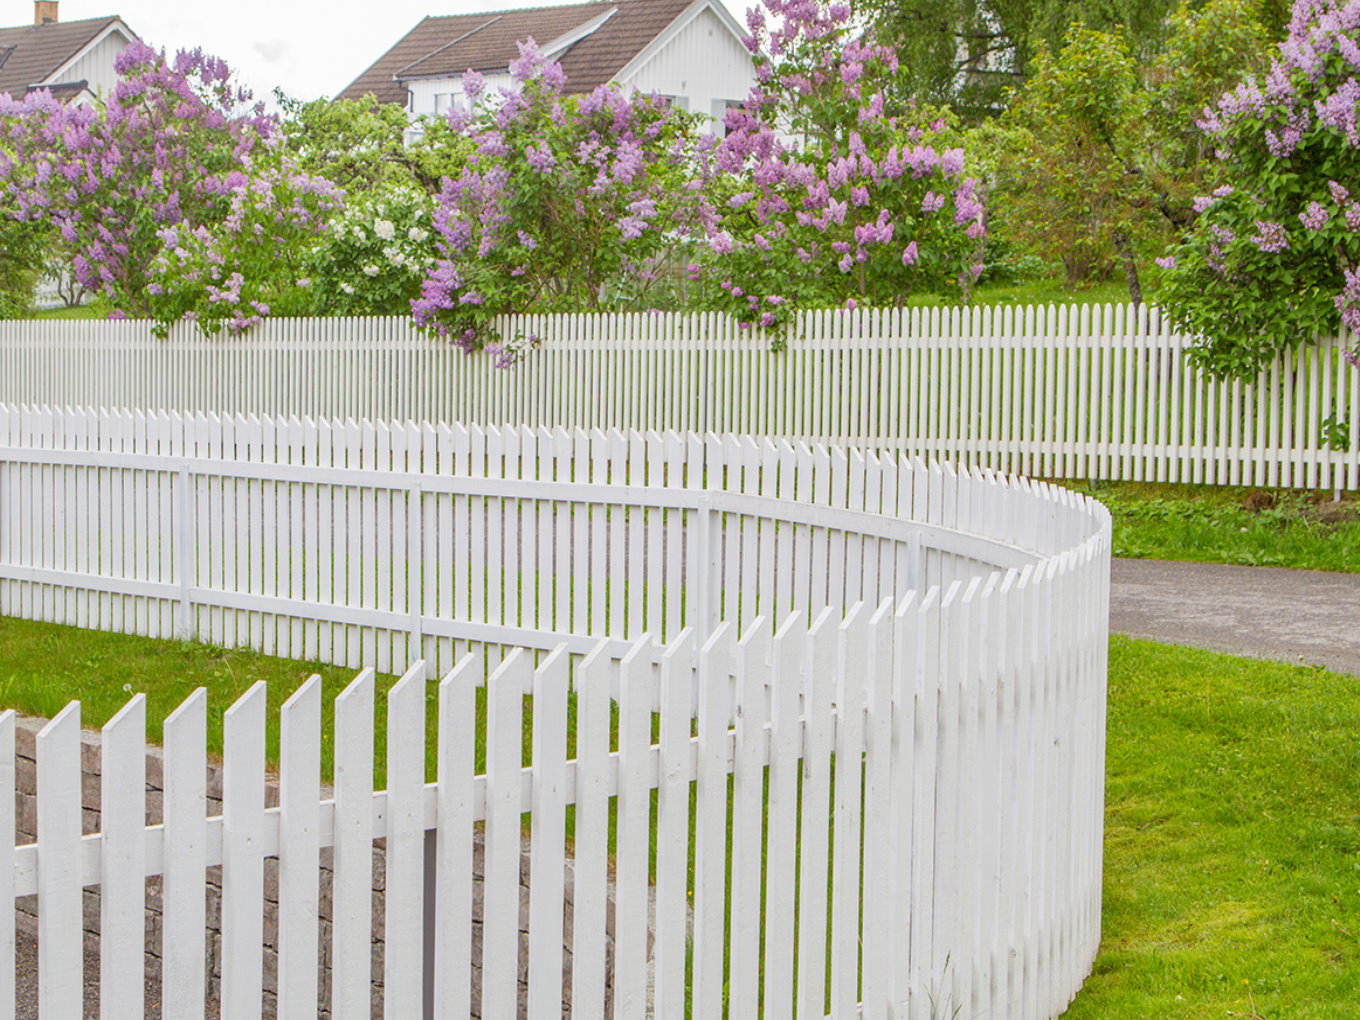 Alma Georgia residential and commercial fencing